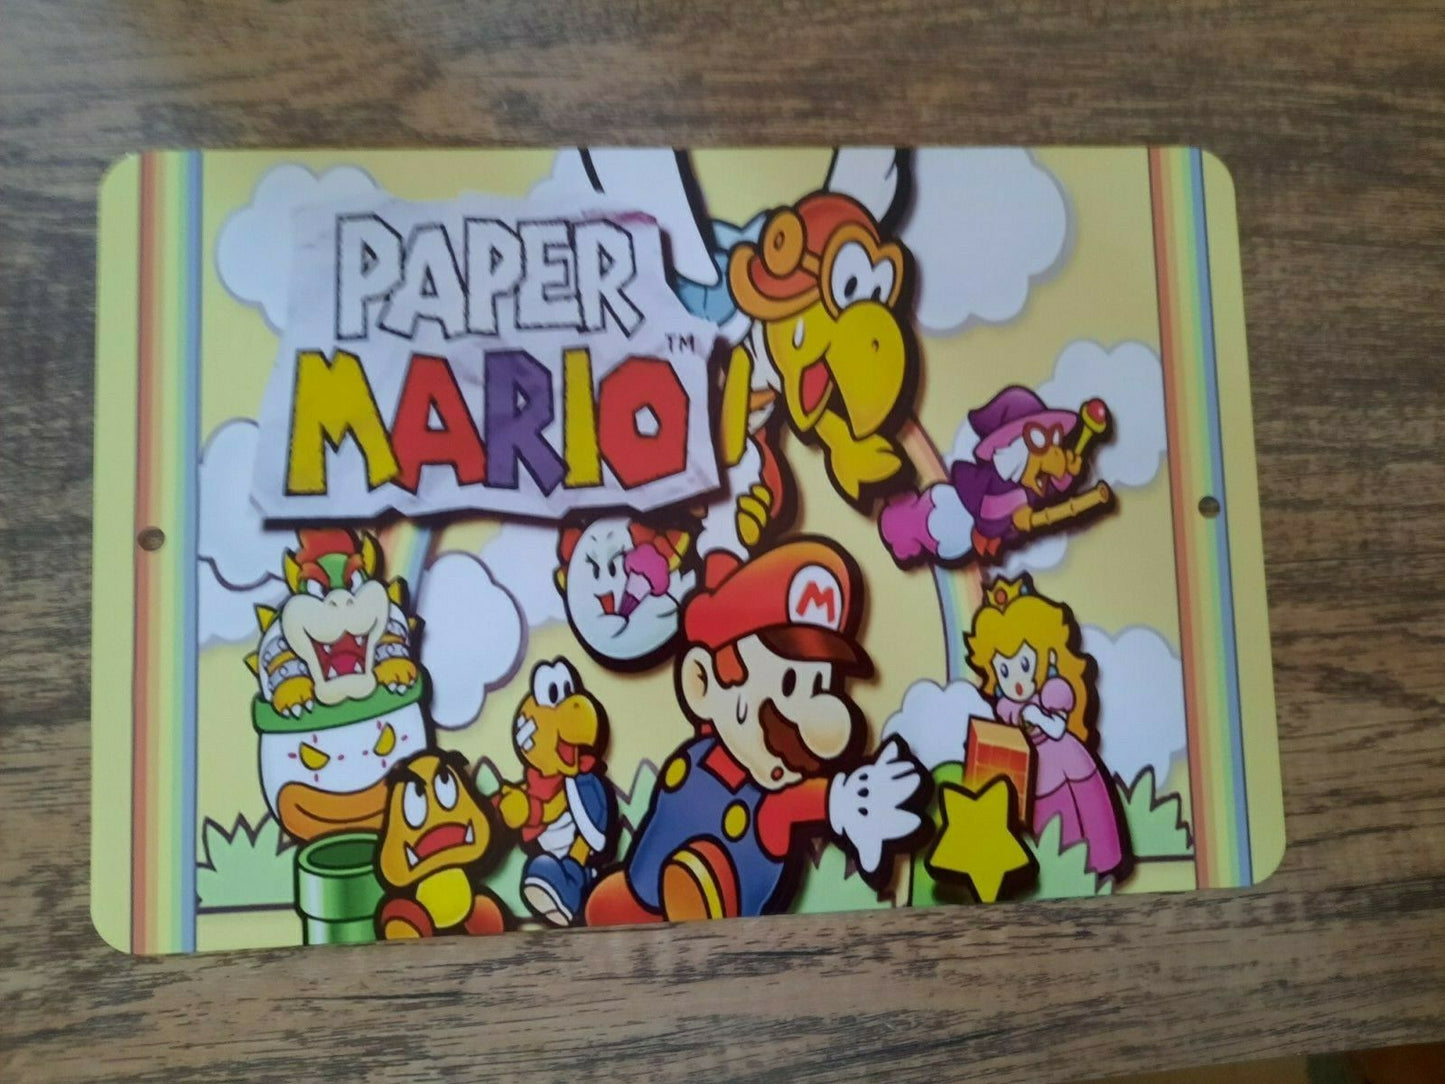 Paper Mario Video Game 8x12 Metal Wall Sign Arcade